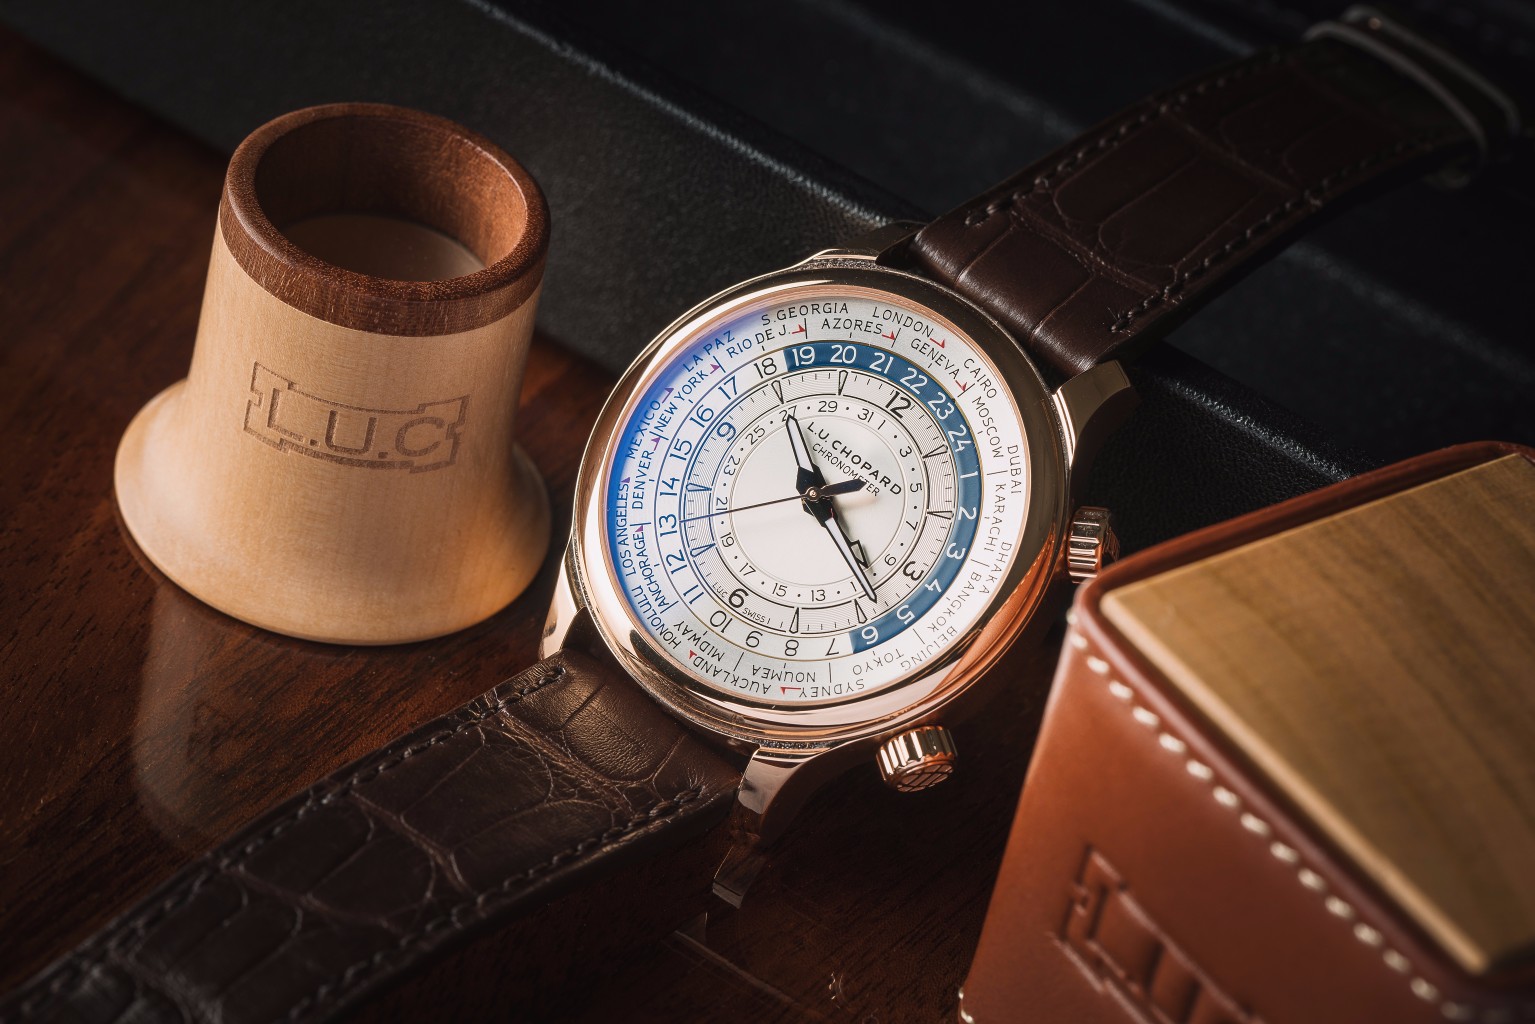 Chopard Launches Two L.U.C Travel Watches And A New Manufacture Movement